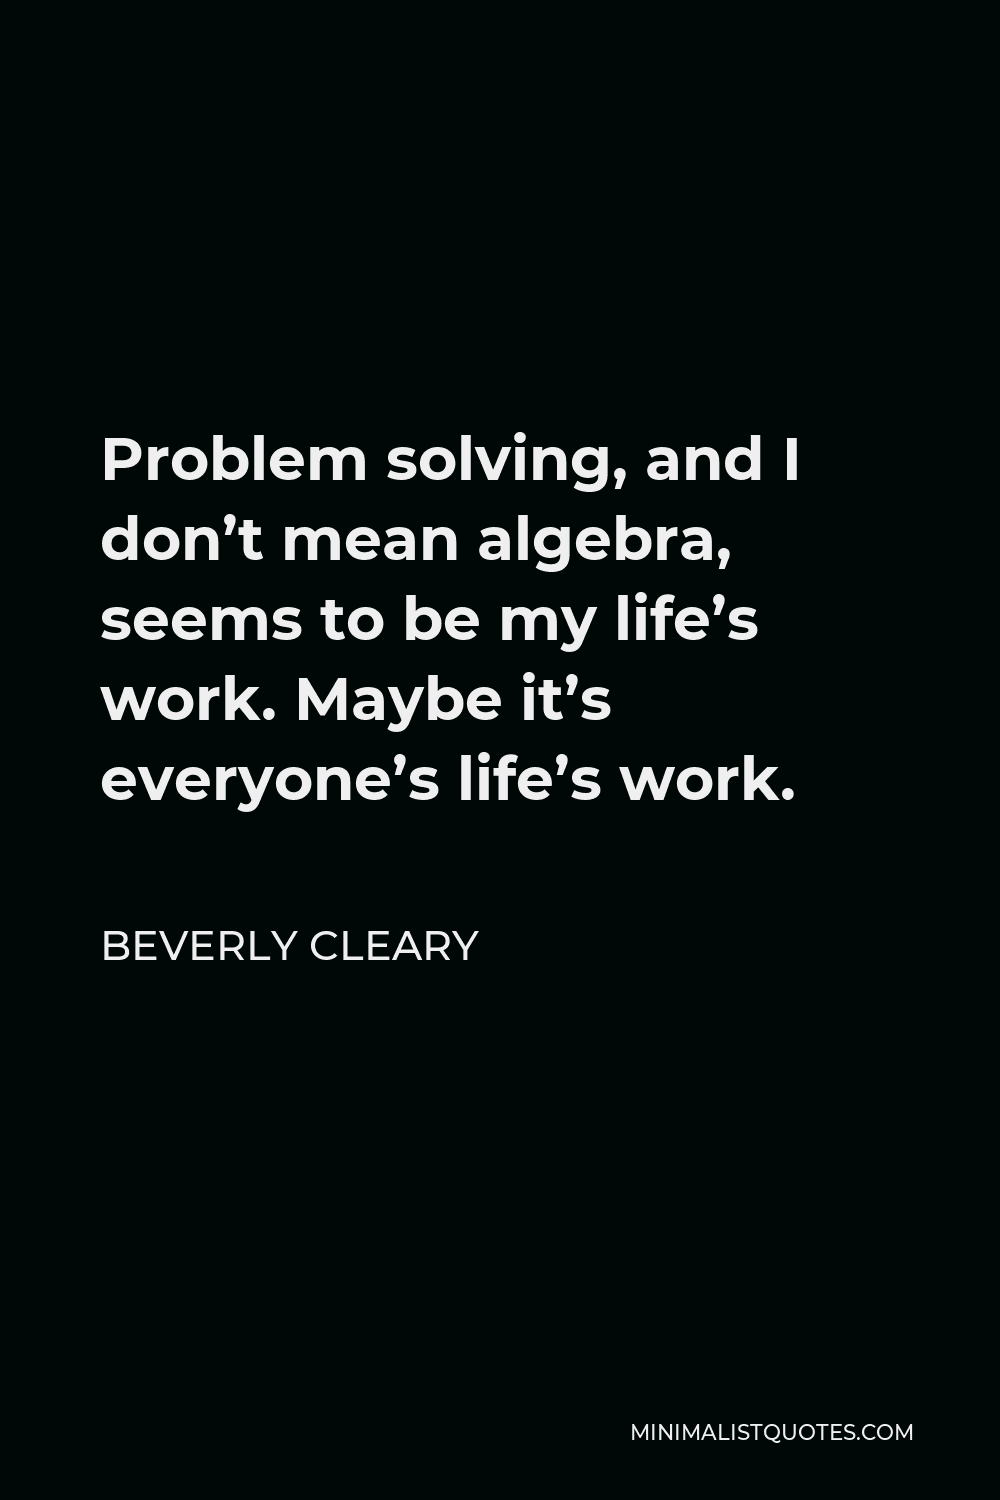 Beverly Cleary Quote - Problem solving, and I don’t mean algebra, seems to be my life’s work. Maybe it’s everyone’s life’s work.